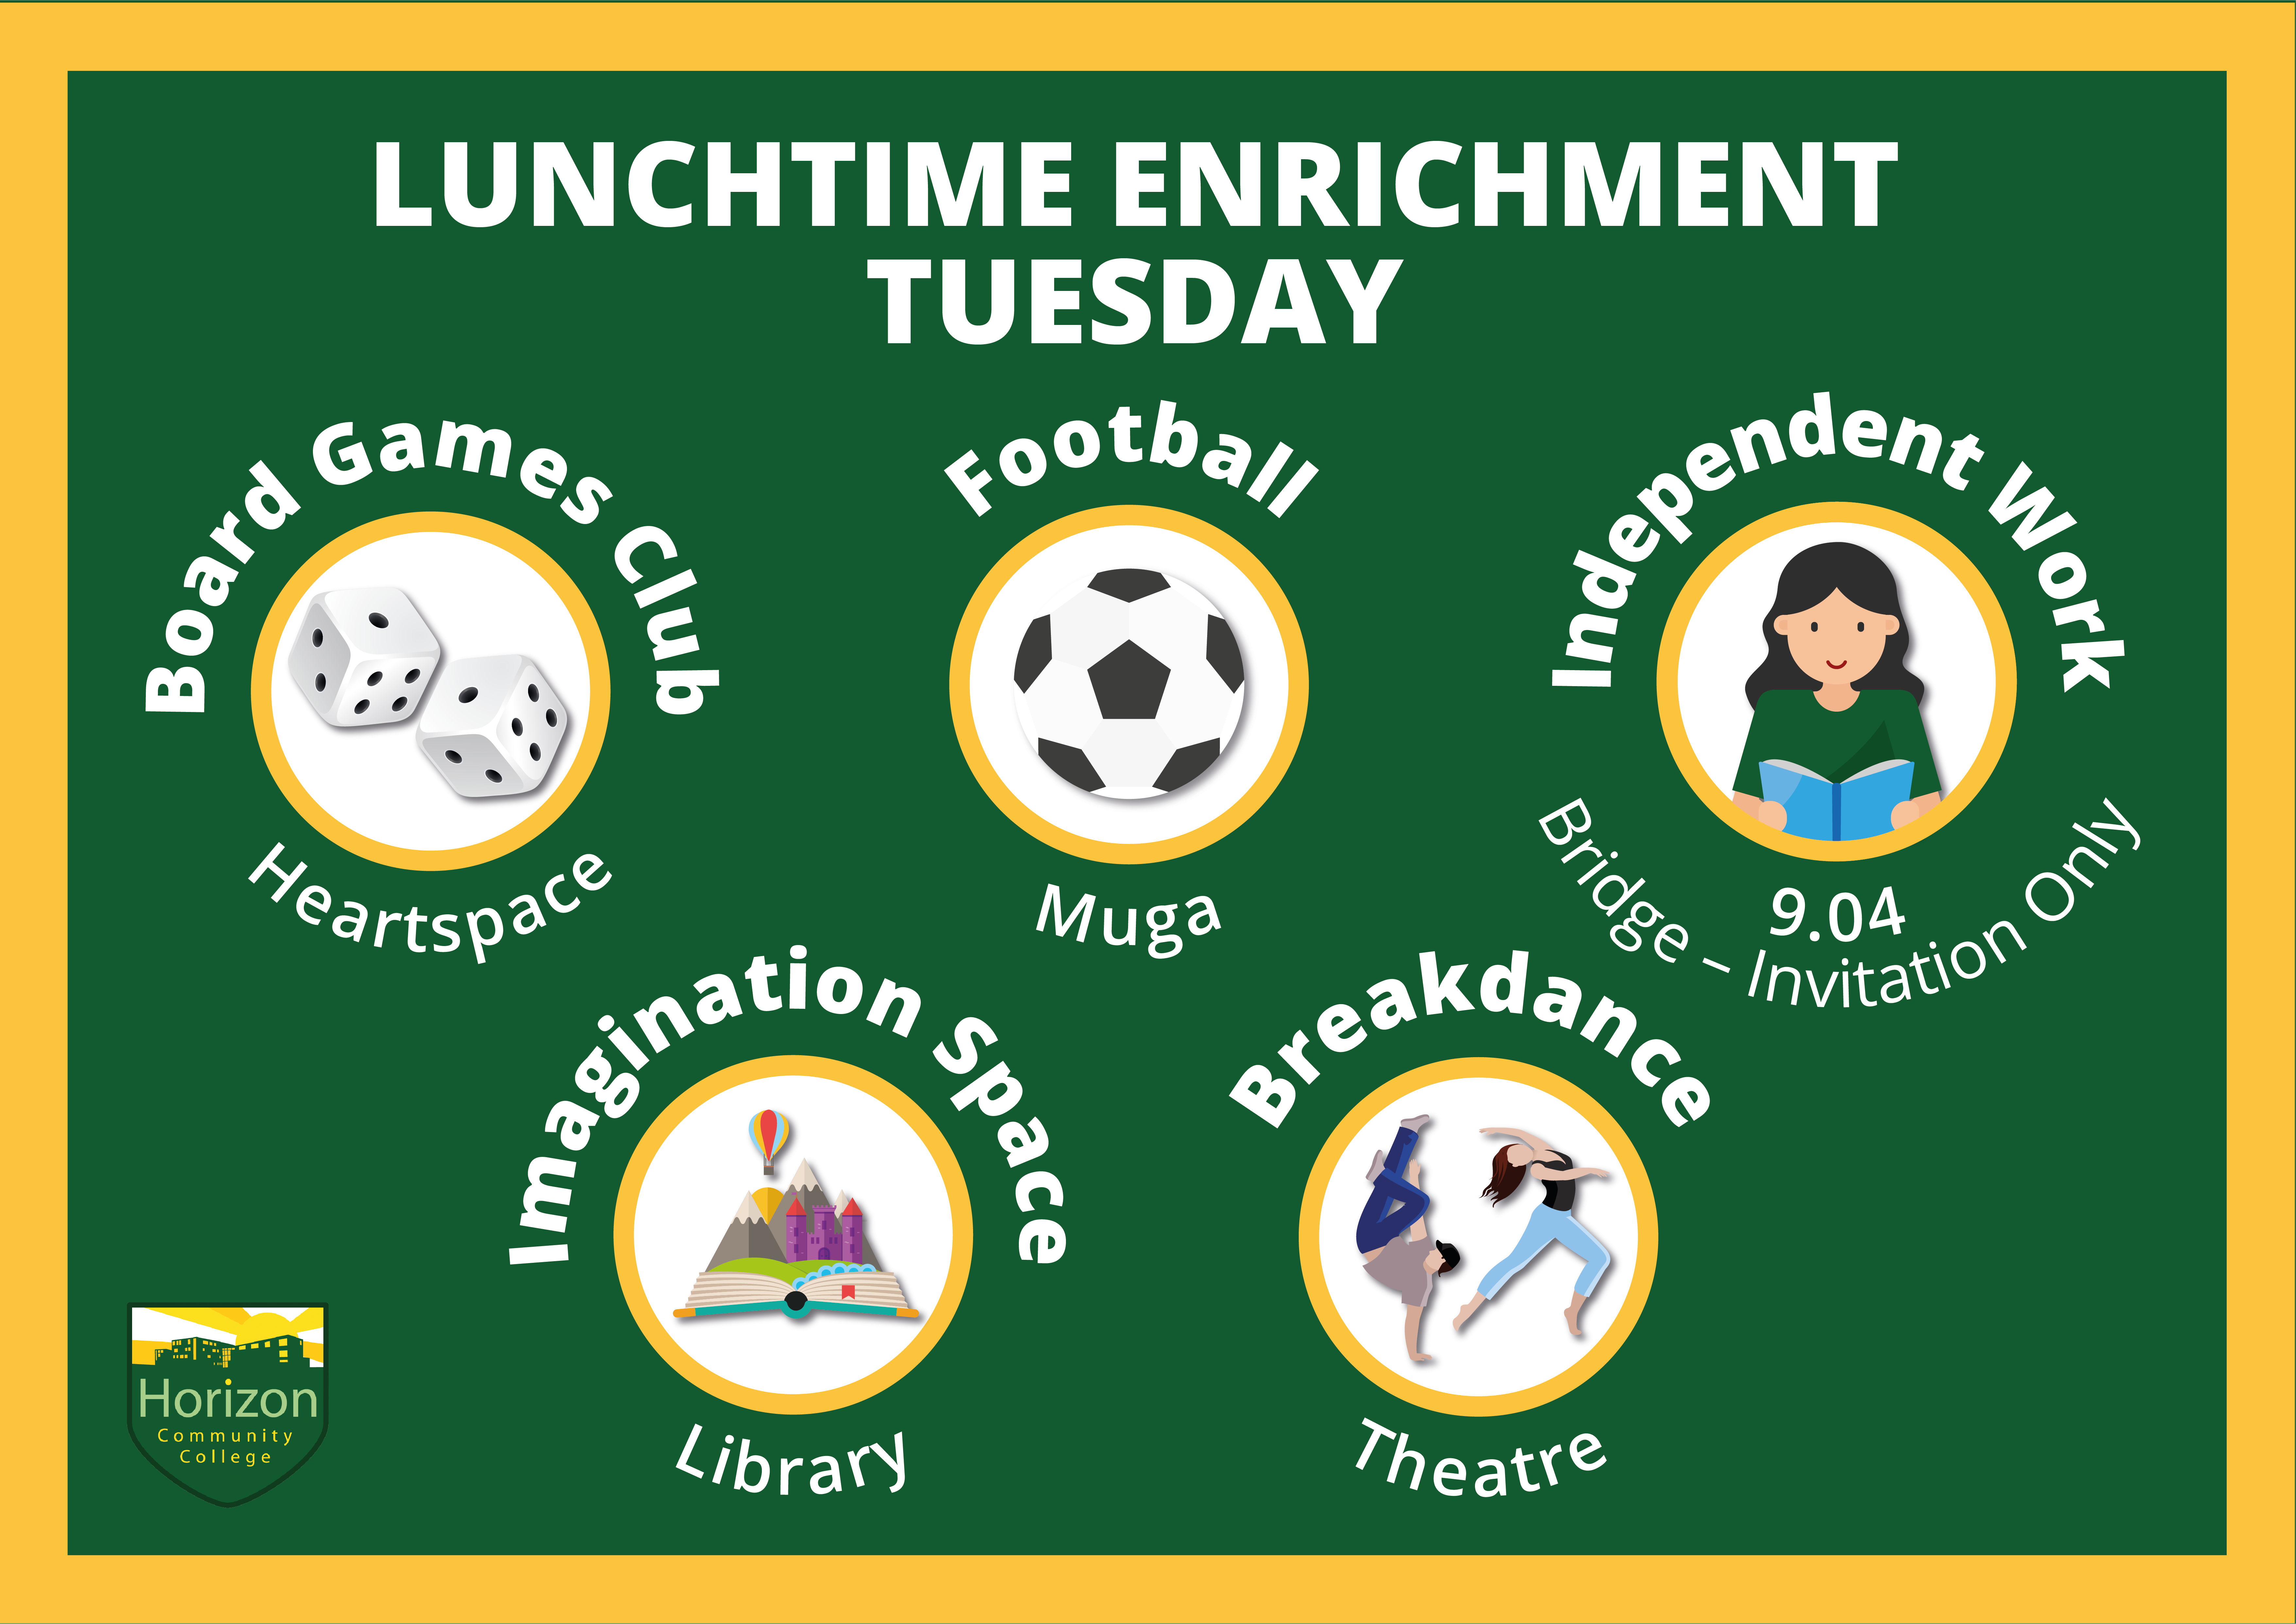 Lunchtime enrichment Tuesday